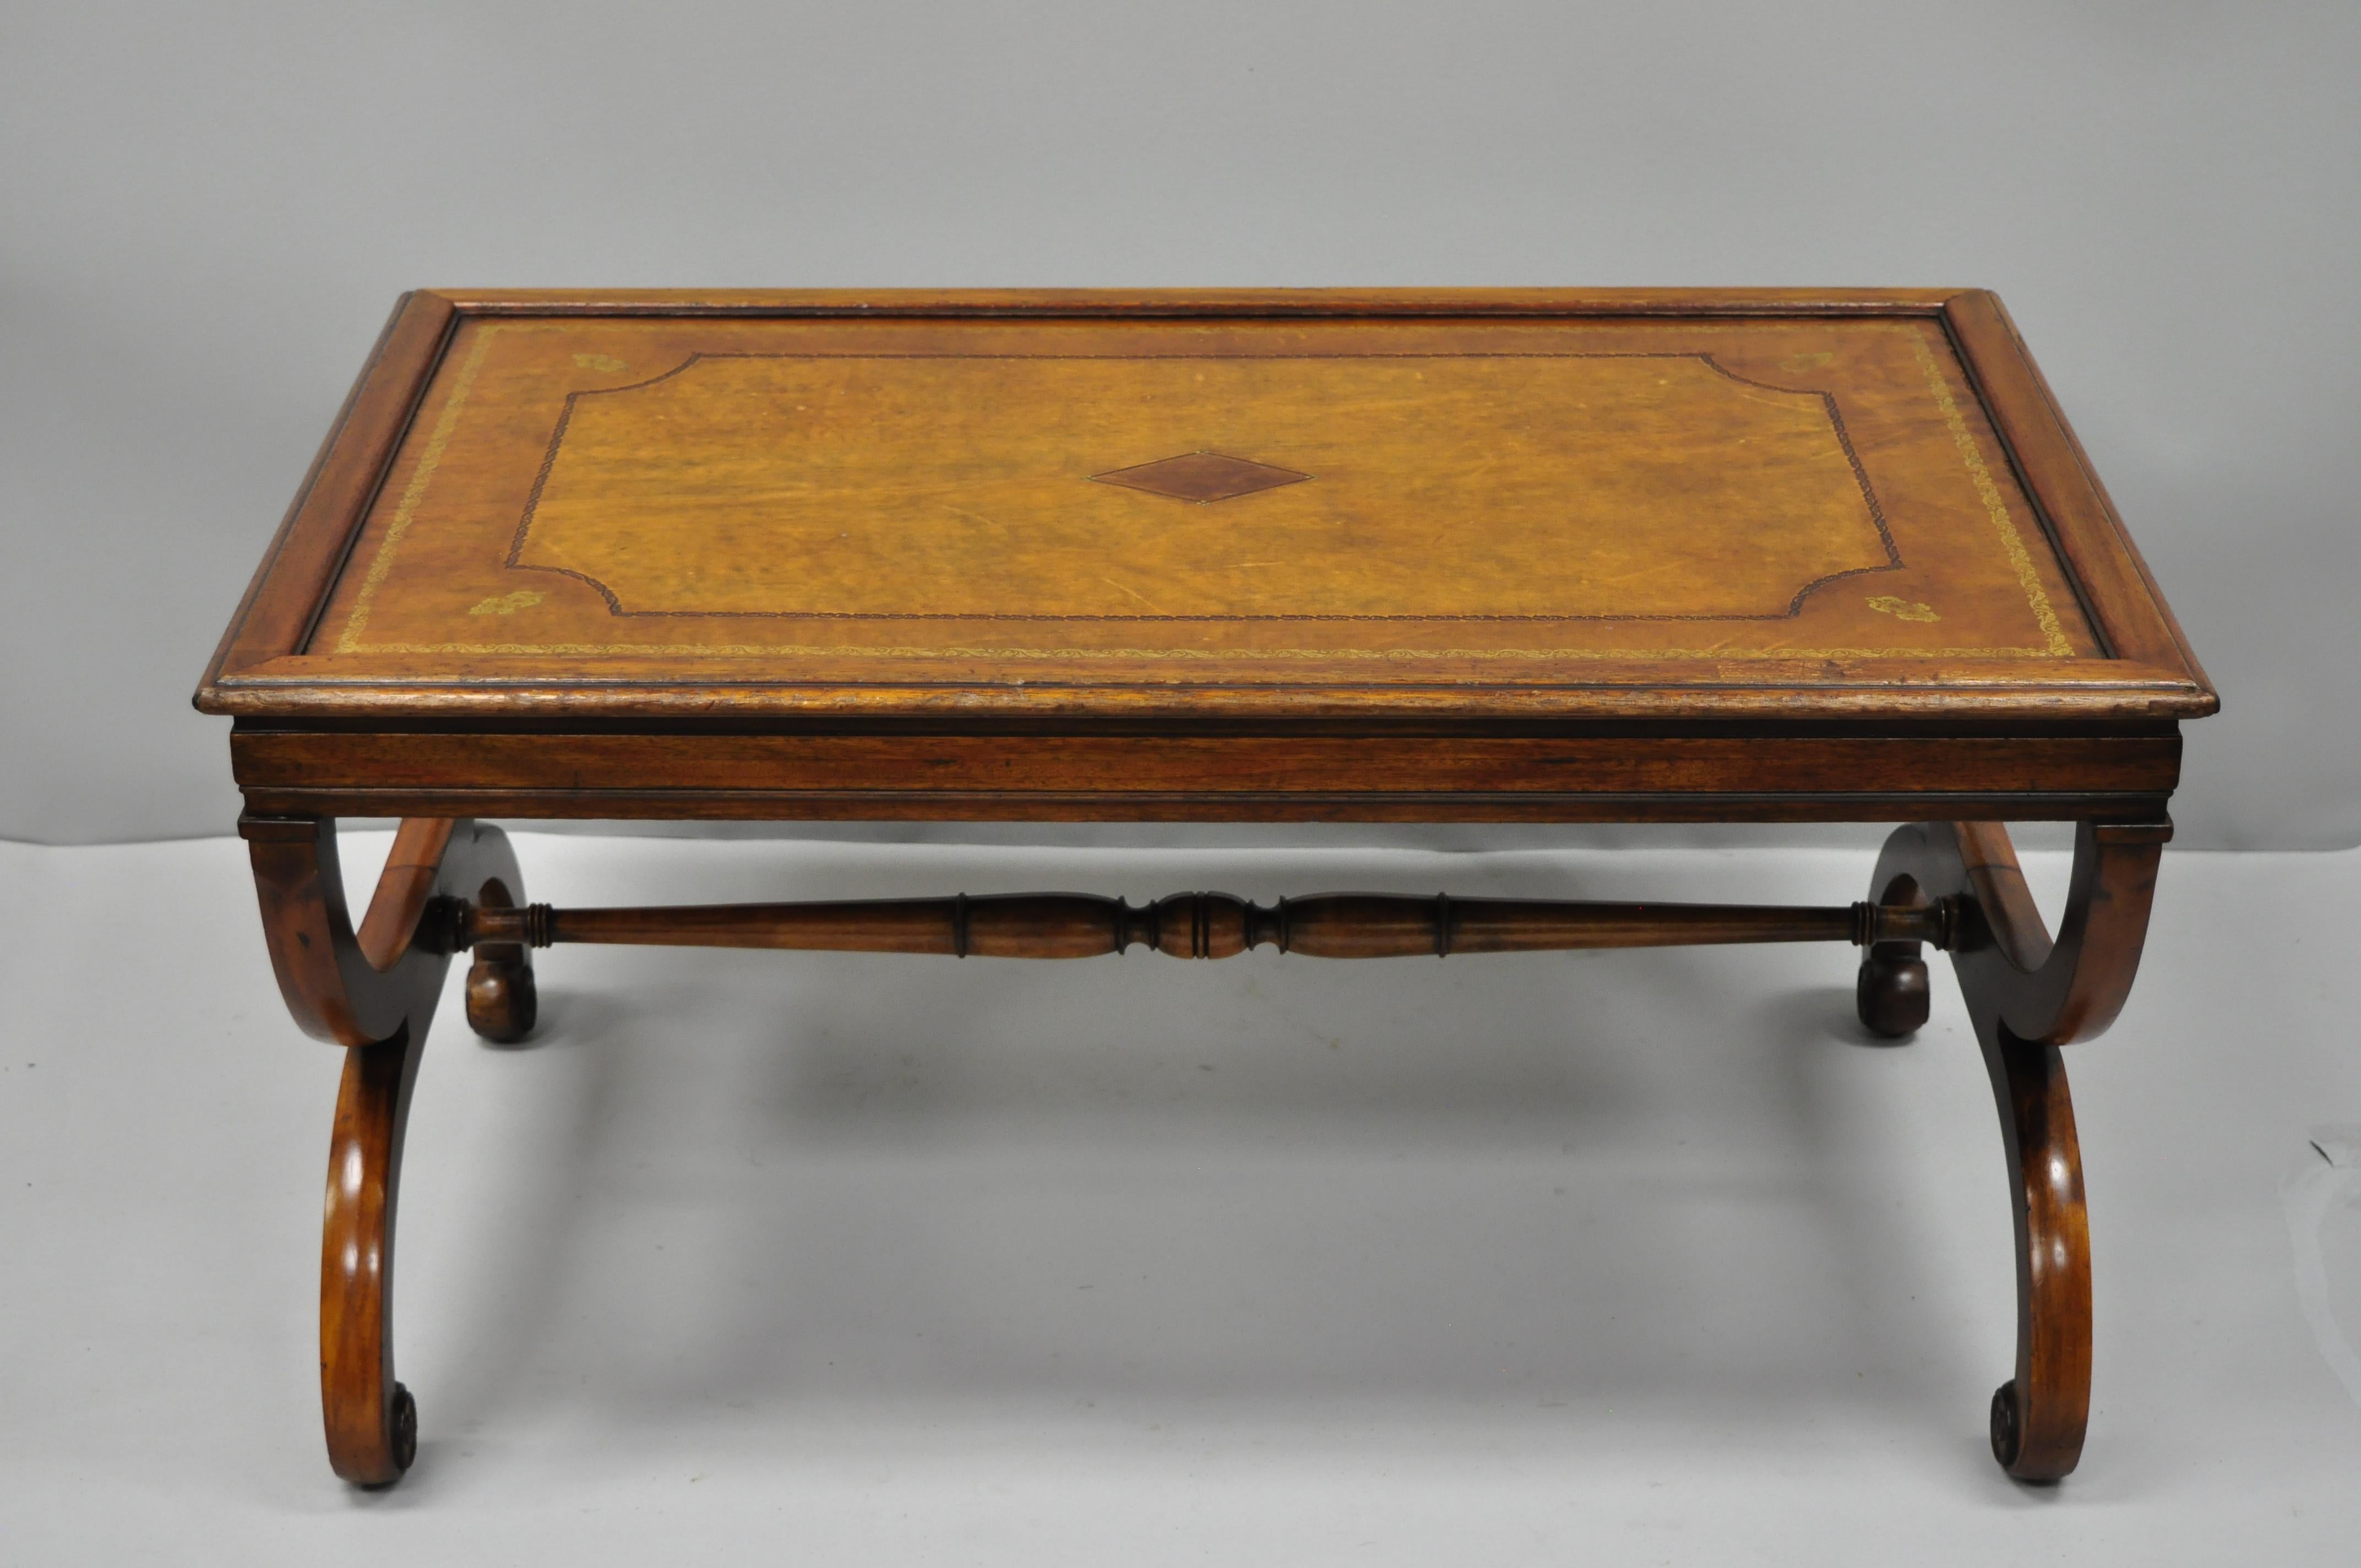 Vintage English regency style tooled leather top curule coffee table. Item features a brown tooled leather top, curule form legs, stretcher base, solid wood construction, beautiful wood grain, great style and form, circa early to mid-20th century.